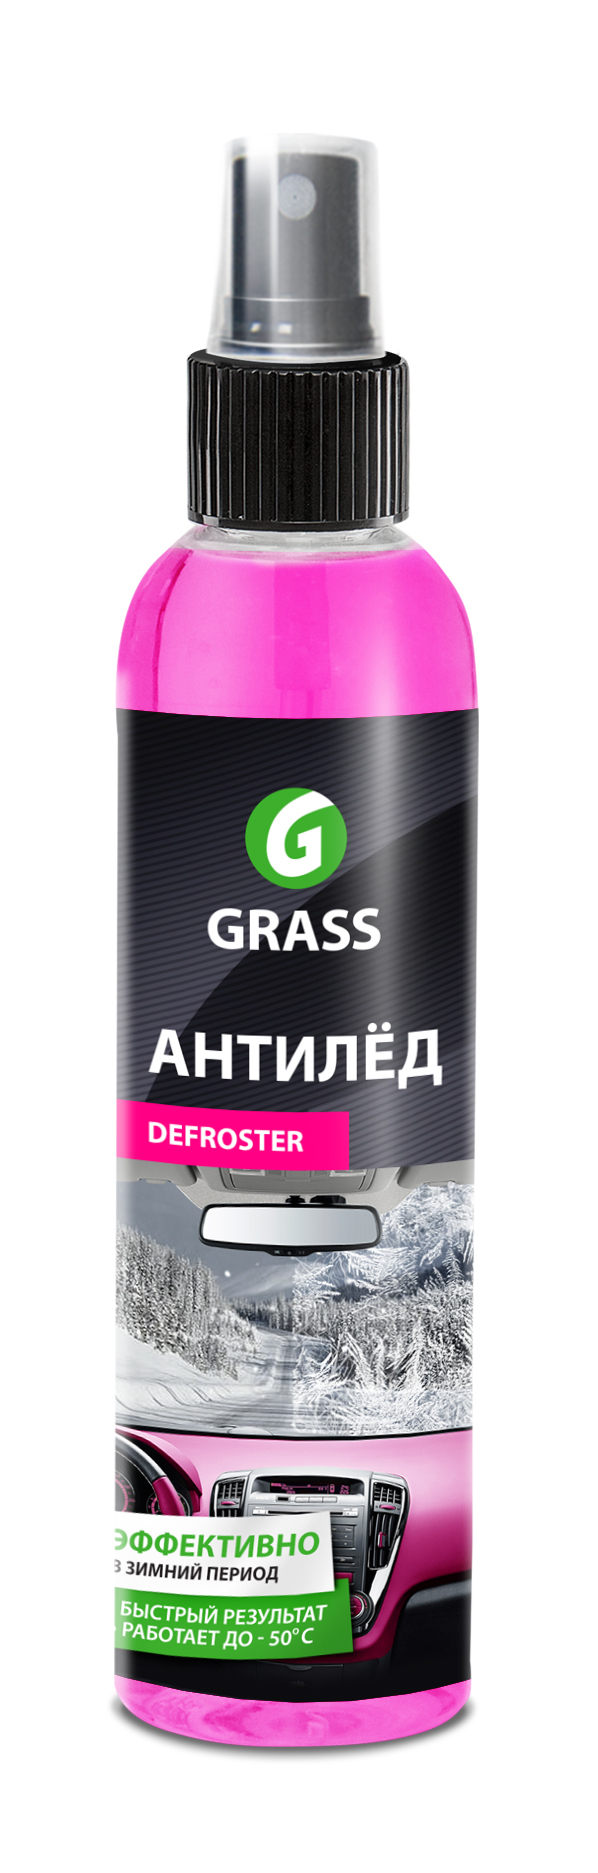 GRASS Антилед "Defroster" 250 мл